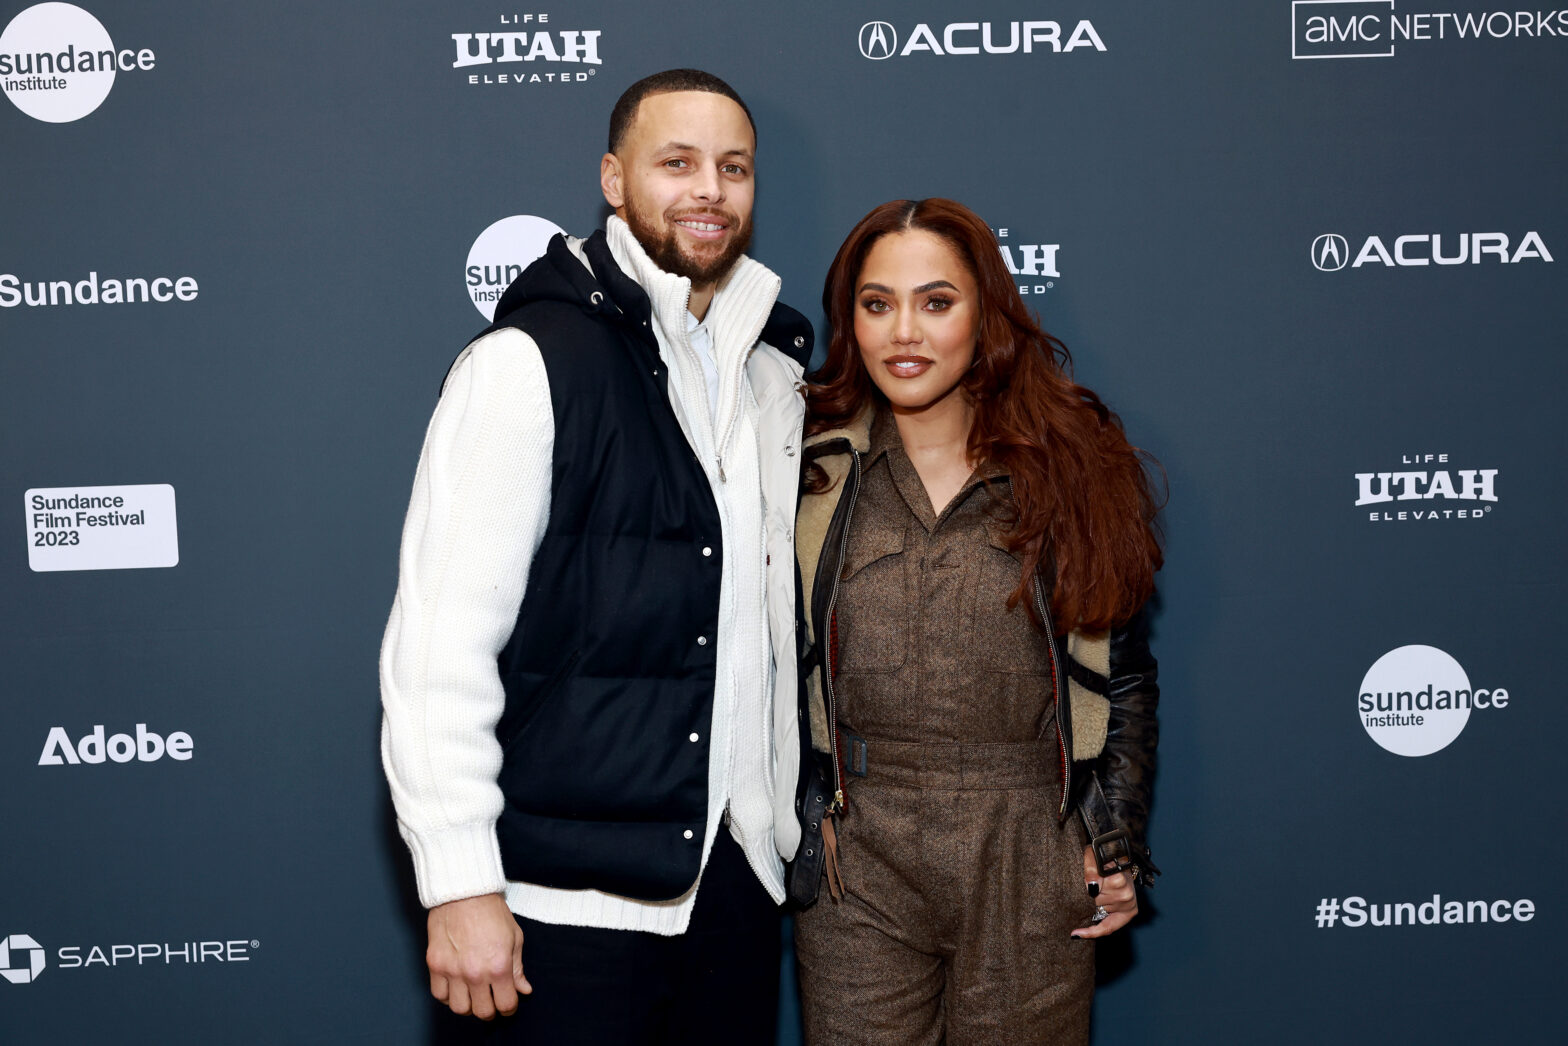 who is stephen curry's wife? pictured: Stephen and Ayesha Curry